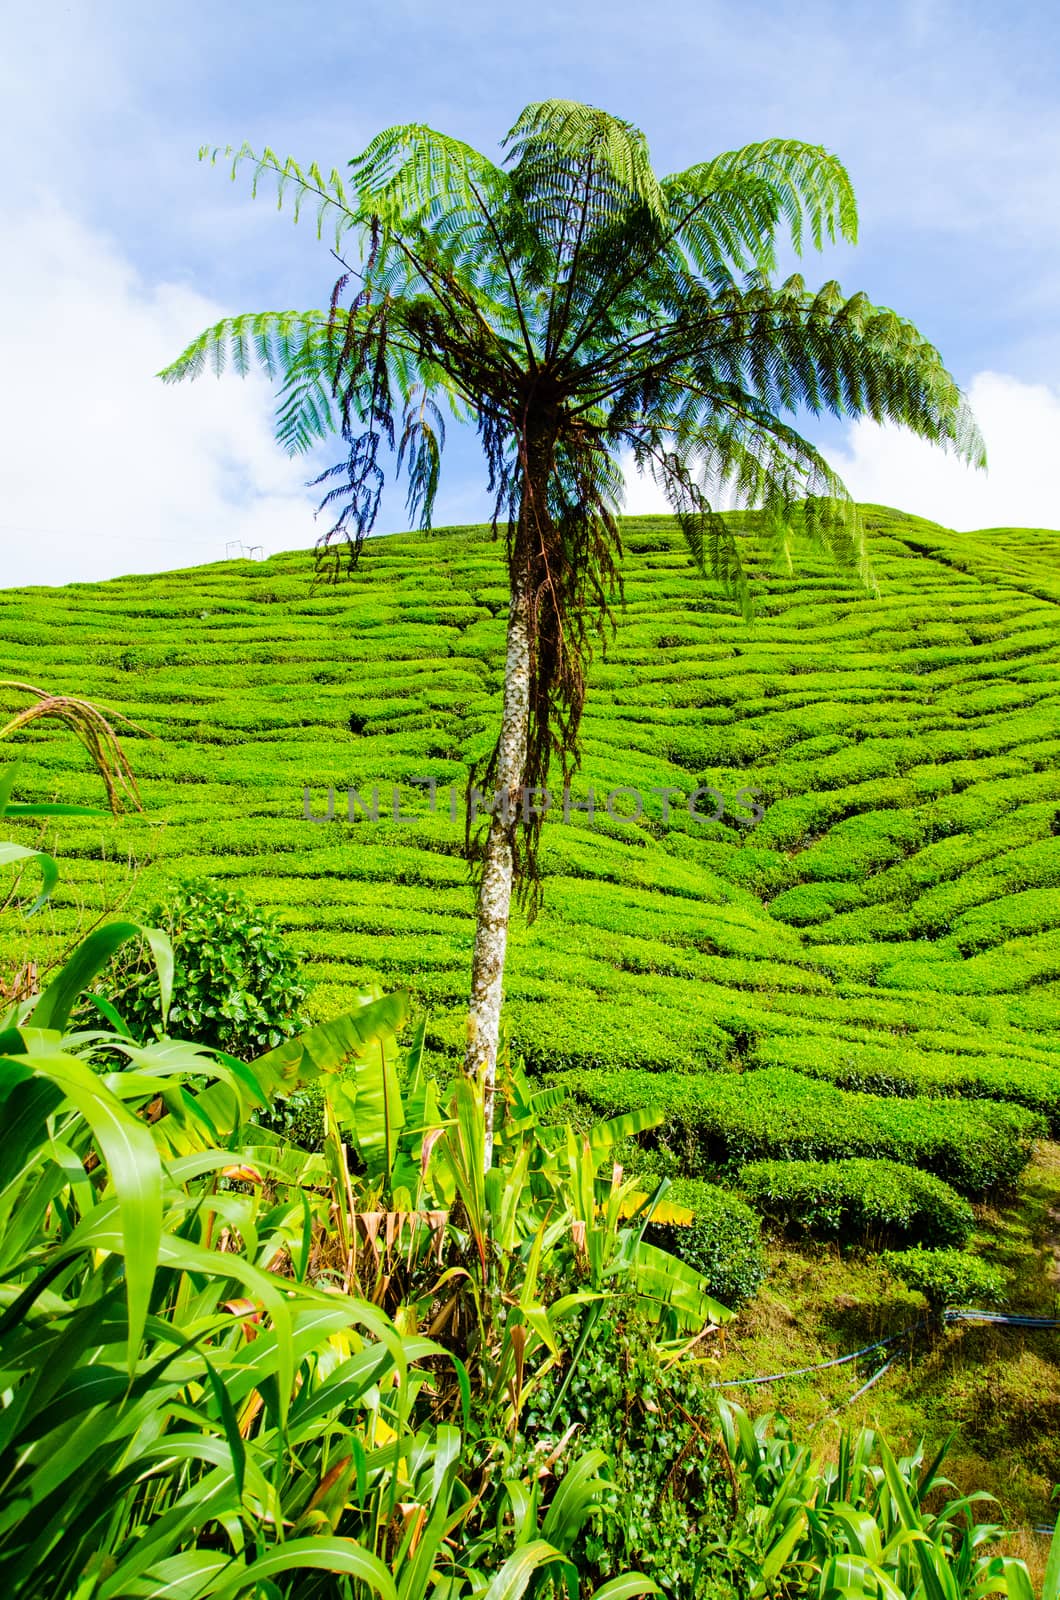 Tea plantations with tree in the foreground. Cameron Highlands, Malaysia. Green hills landscape